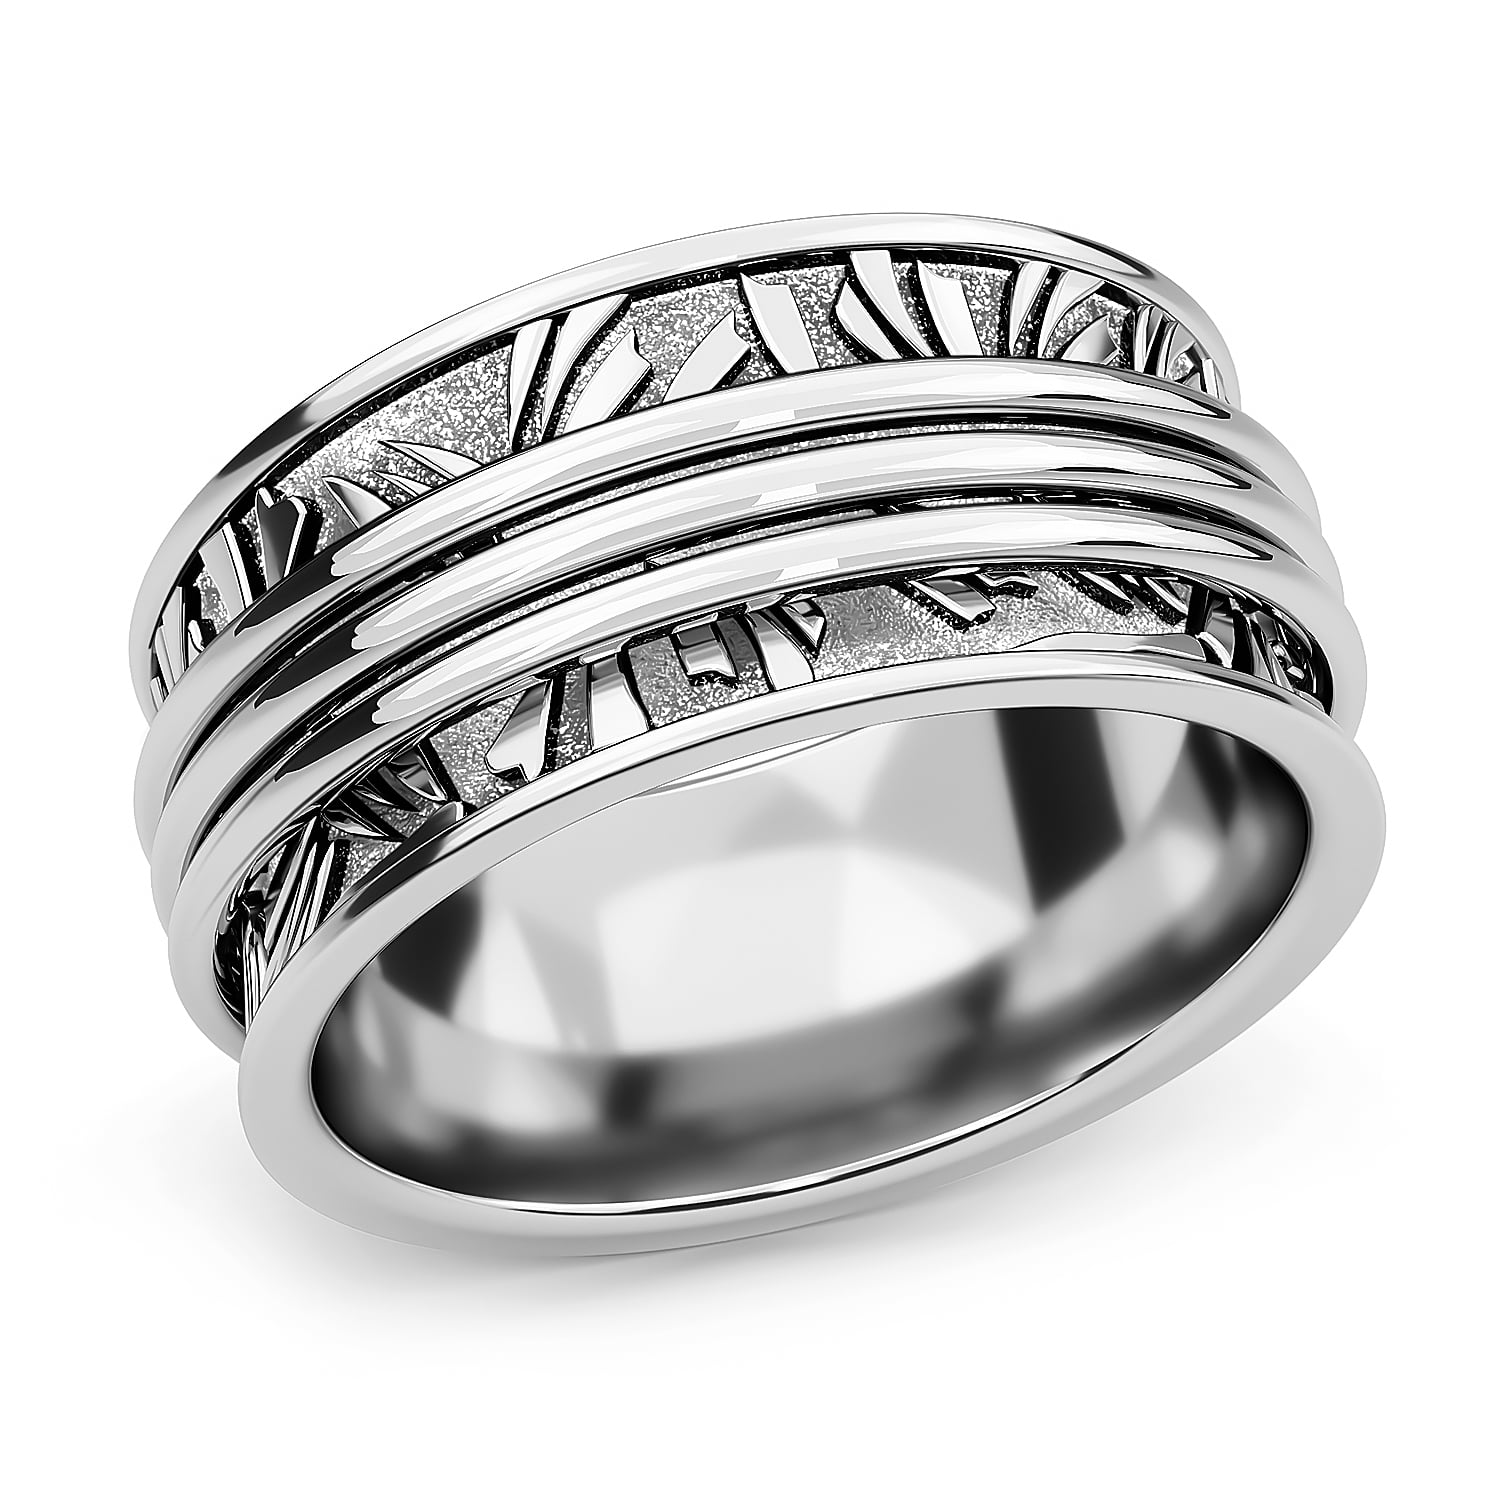 INTERTWINING HAMMERED ROLLING BANDS GENUINE STERLING SILVER.925  Sizes 7 to 10 